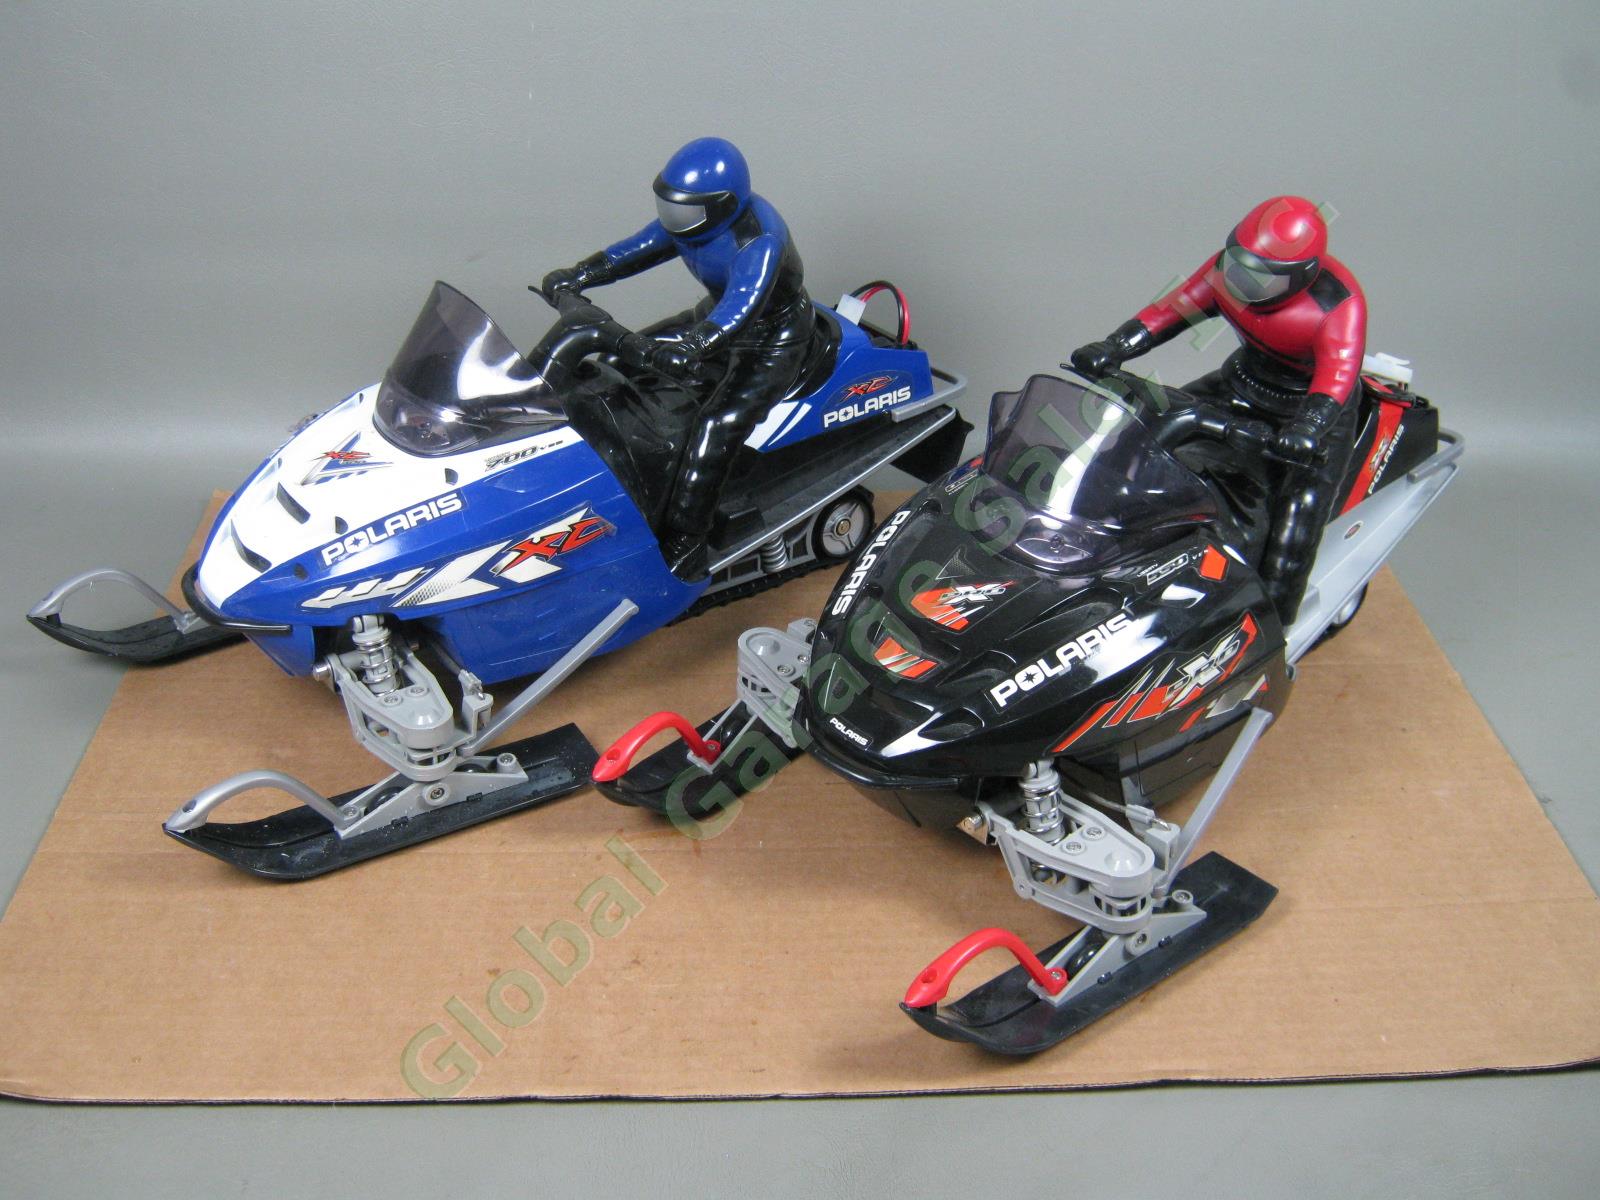 2 Polaris RC Remote Control Snowmobile Lot Liberty 550 Pro X 700 XC Tested As-Is 1